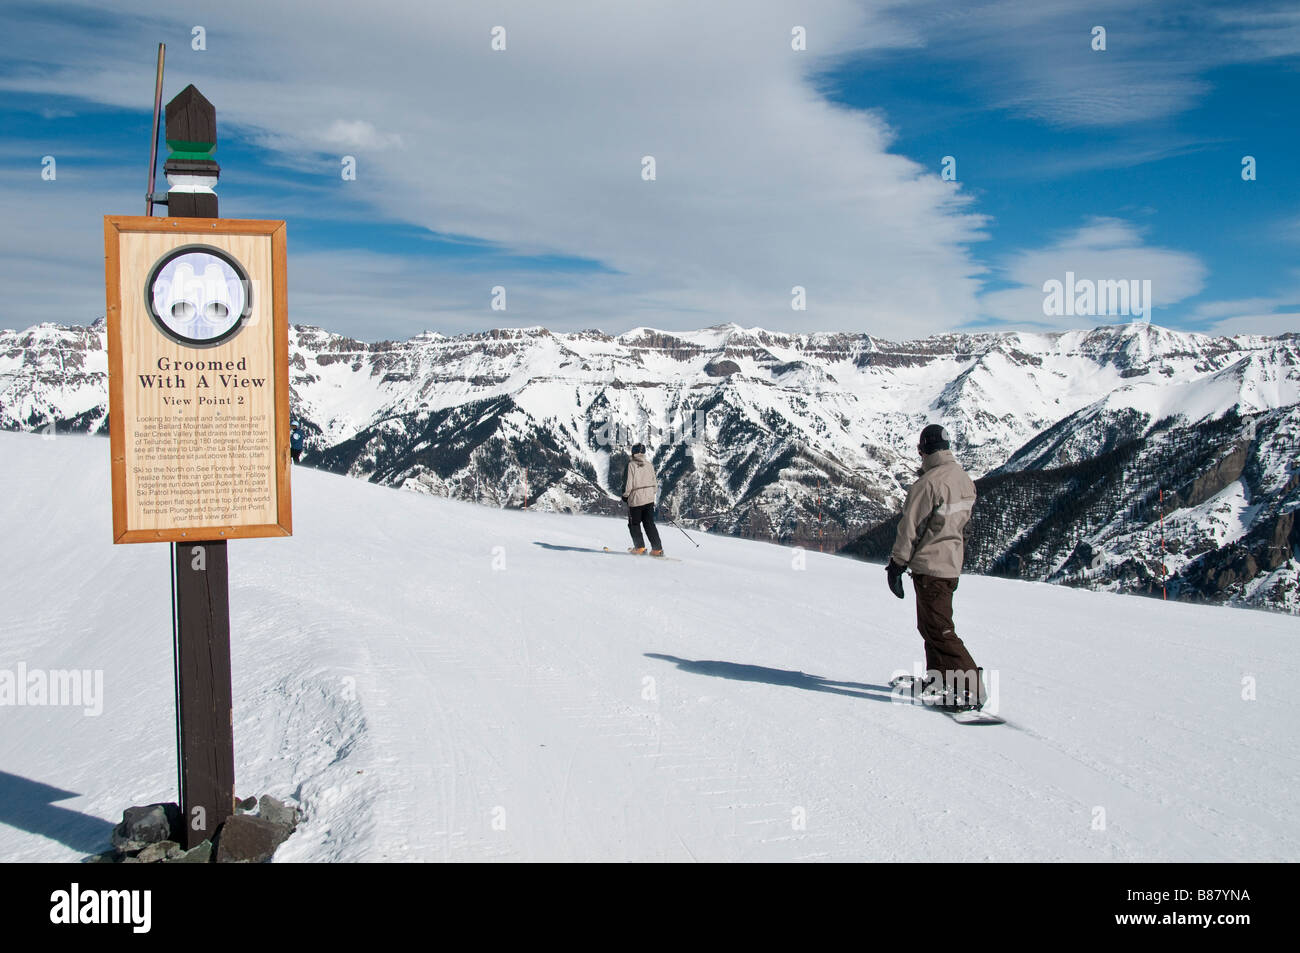 Groomed with a view, View Point 2 sign, Telluride Ski Resort, Telluride, Colorado. Stock Photo